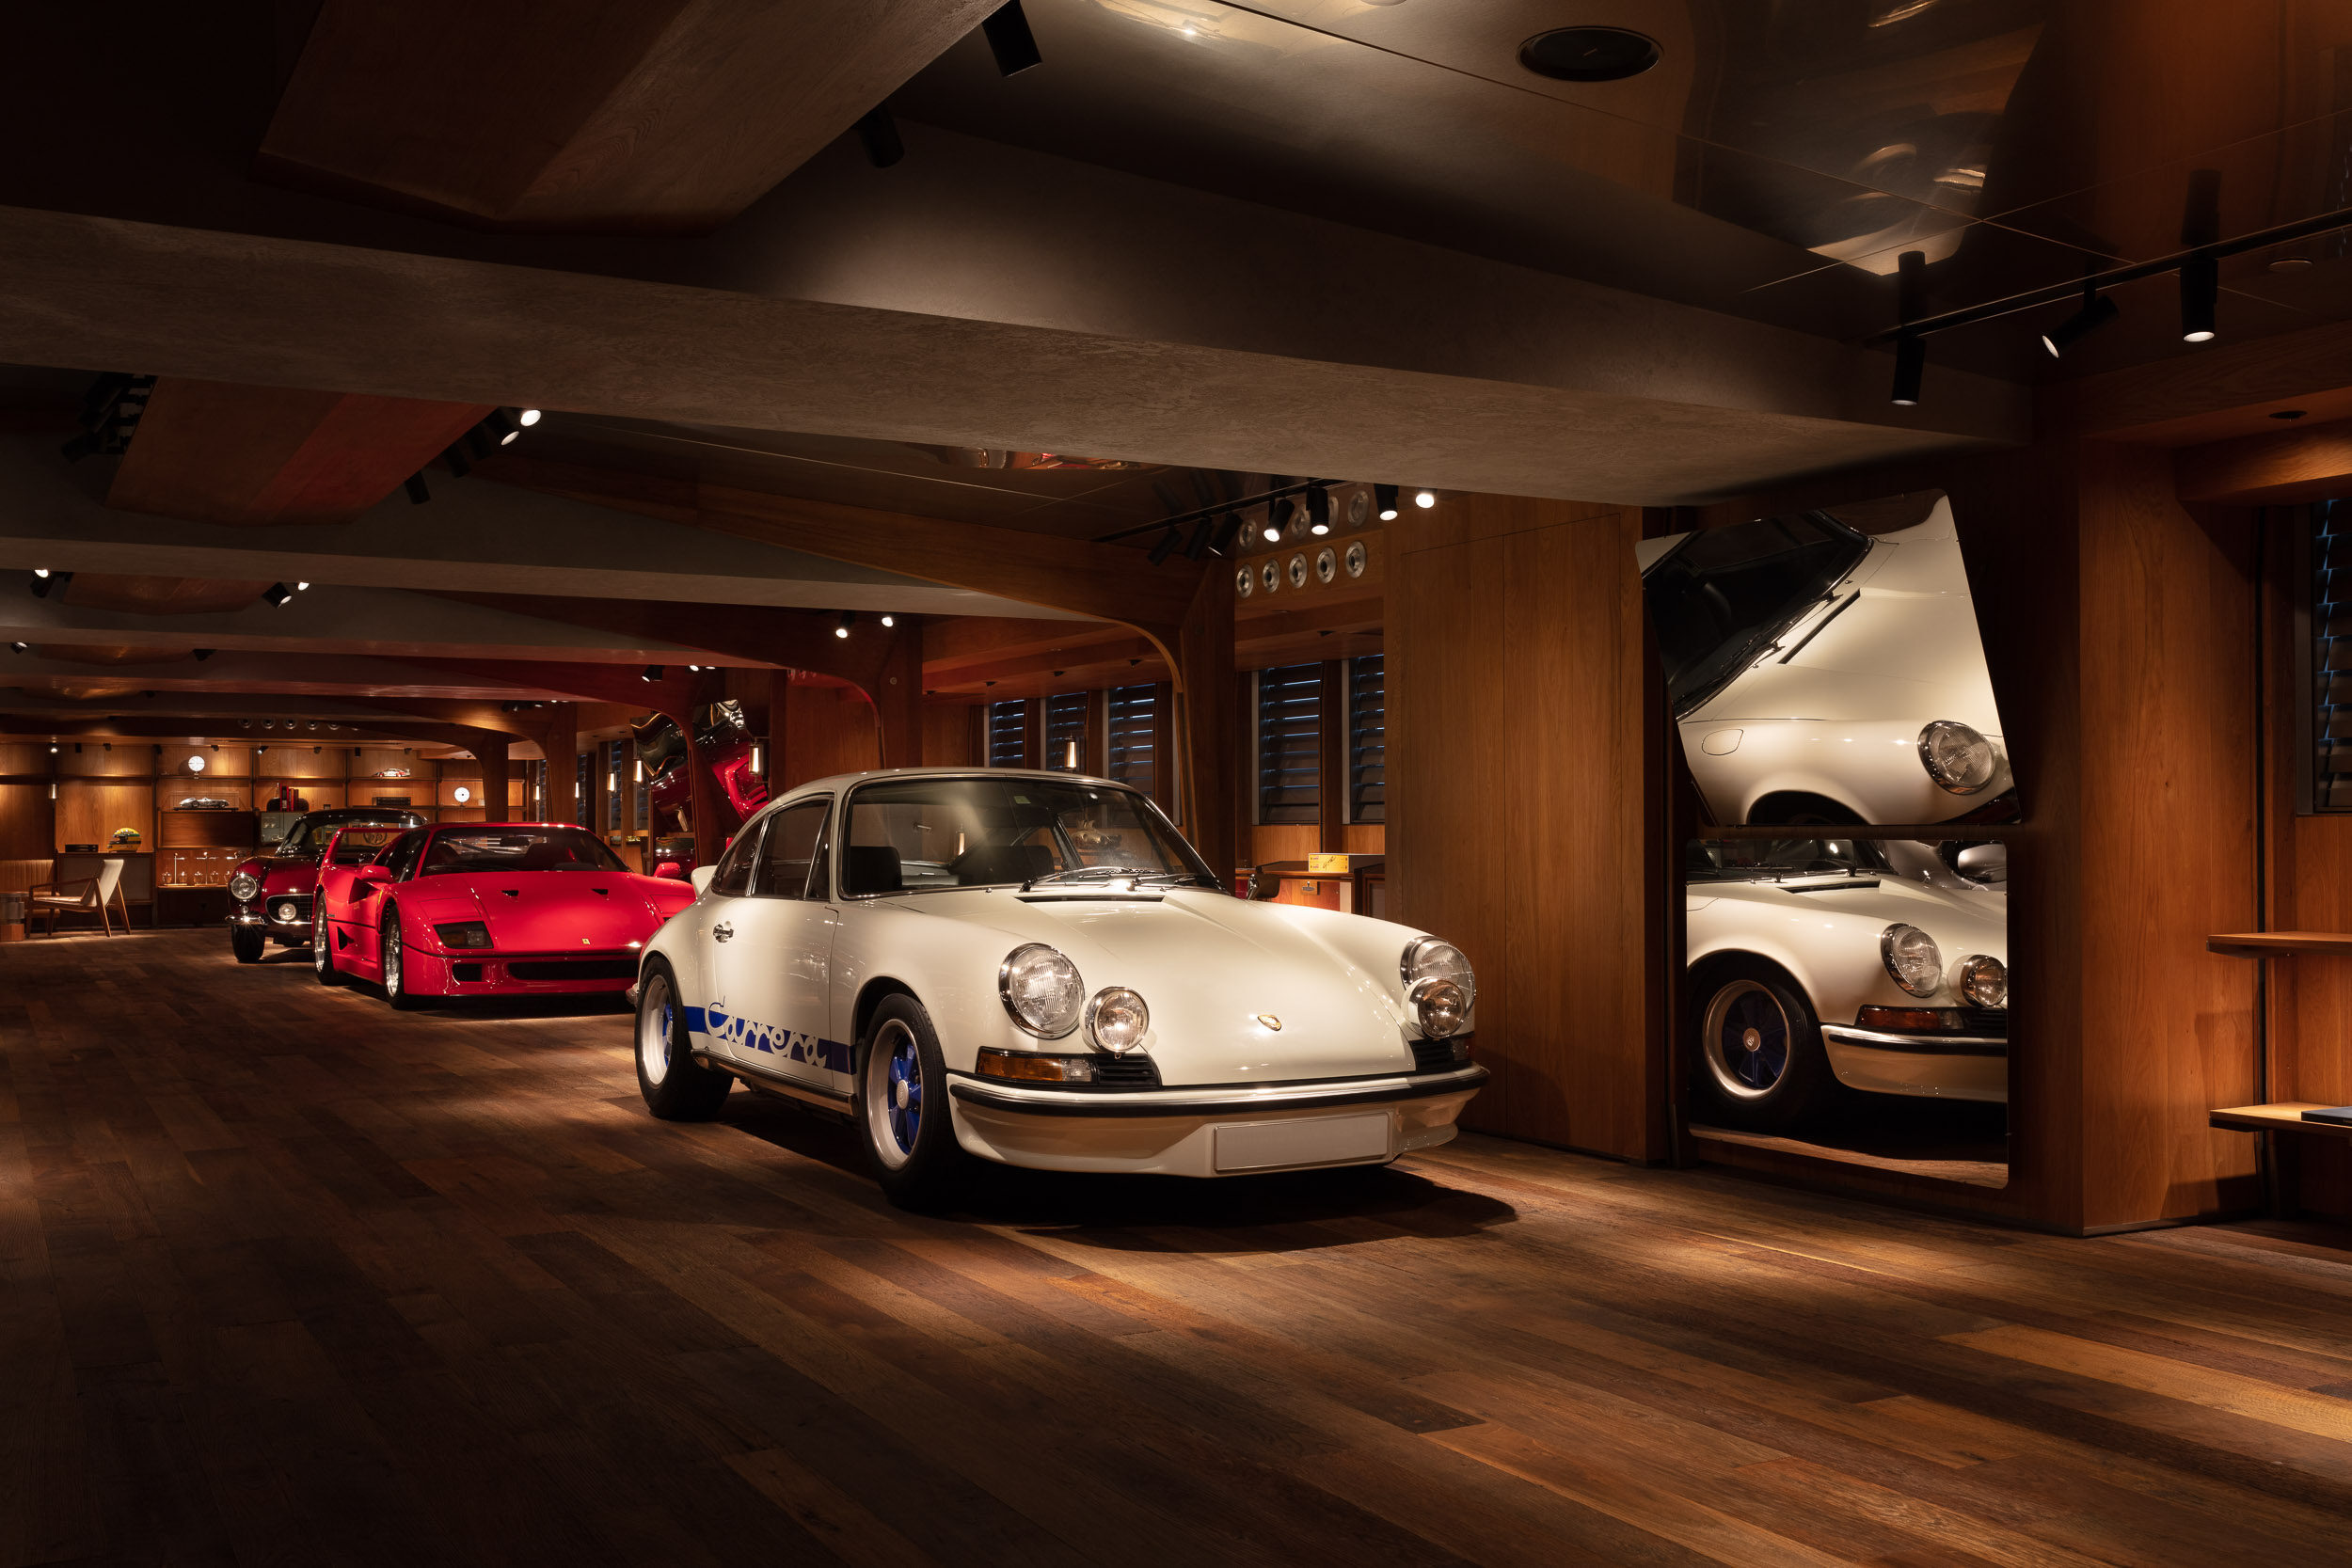 A vintage car collector’s “library” of motors and car memorabilia in Hong Kong marries function and form in a space that would not look out of place in a James Bond movie. Photo: A Work of Substance